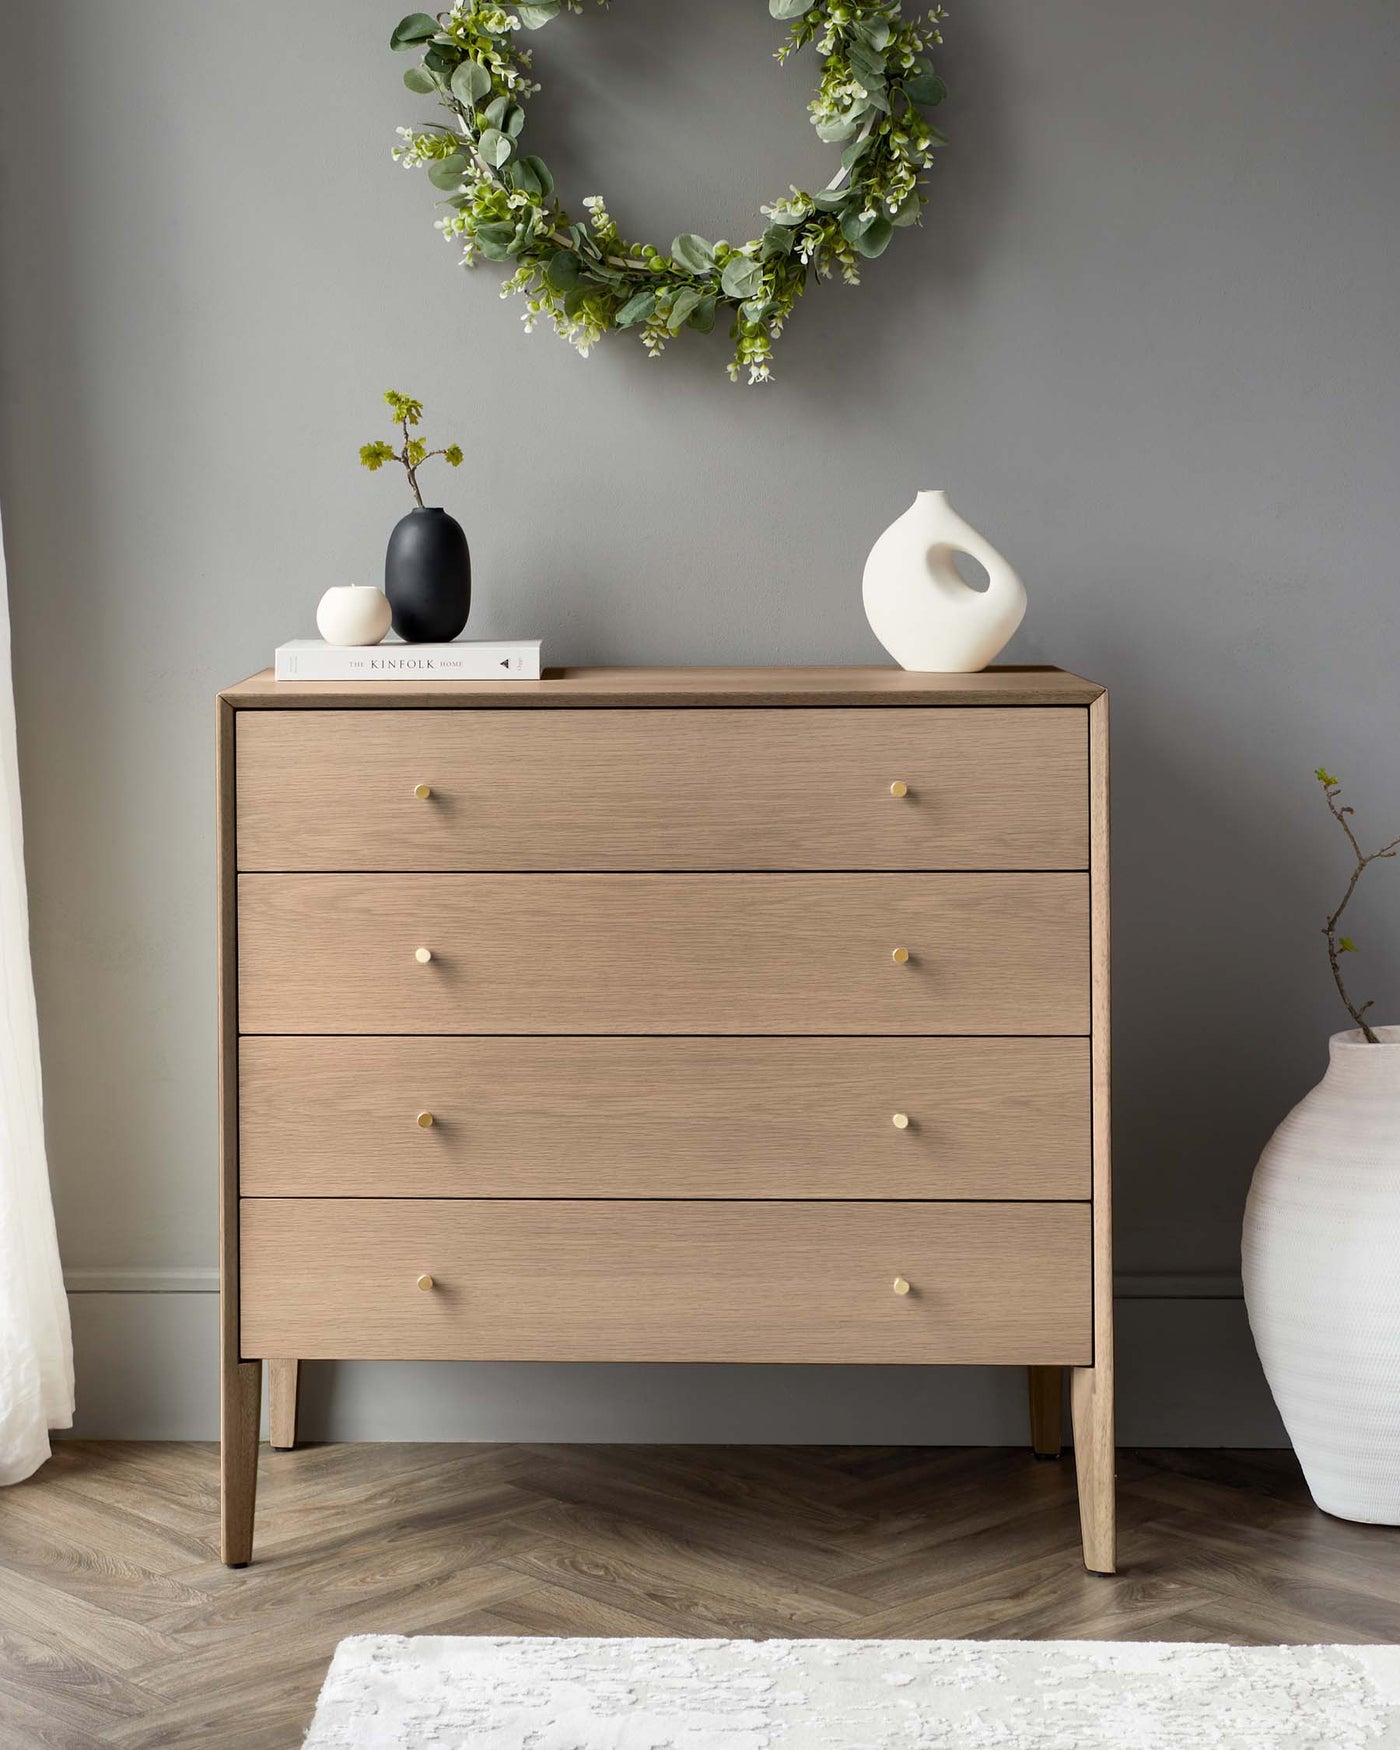 Modern four-drawer wooden dresser with round tapered legs and small round knobs, set against a grey wall with a green leafy wreath hanging above. A small white vase, black ceramic piece, and a book rest atop the dresser, next to a large white vase on the floor to the right.